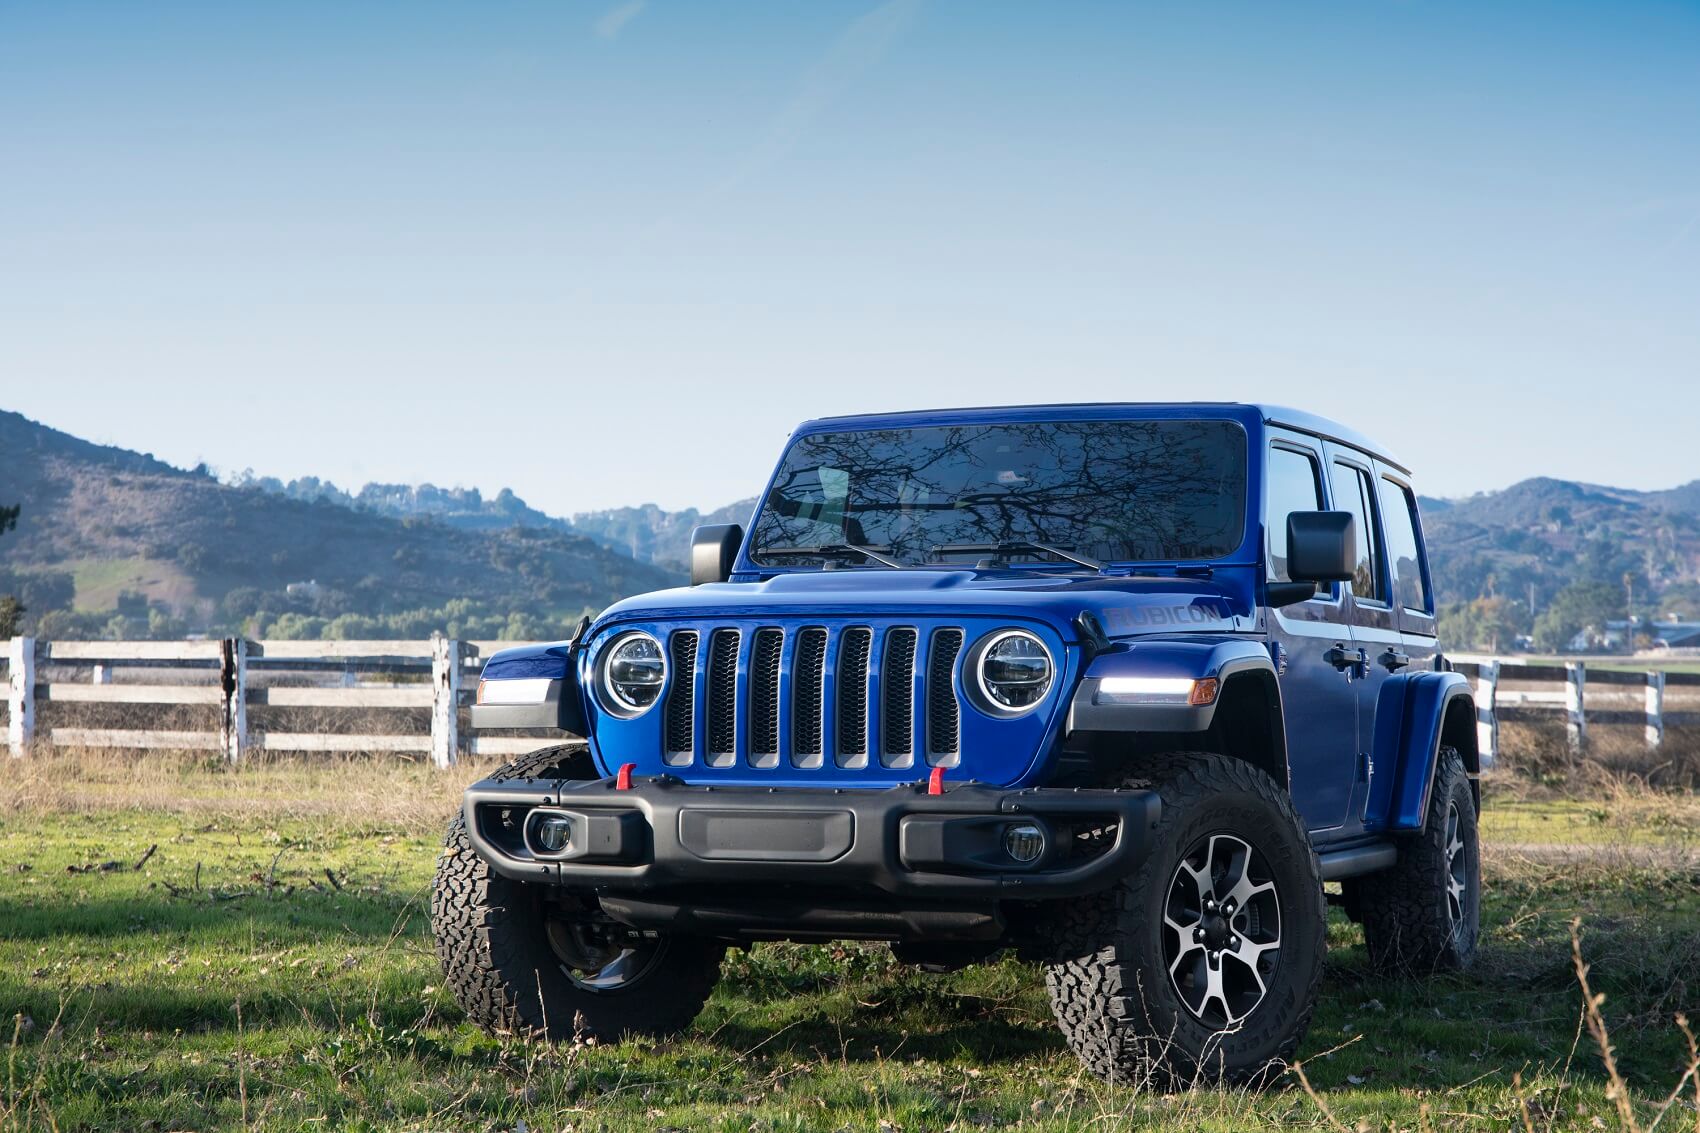 Selecting a Jeep Model